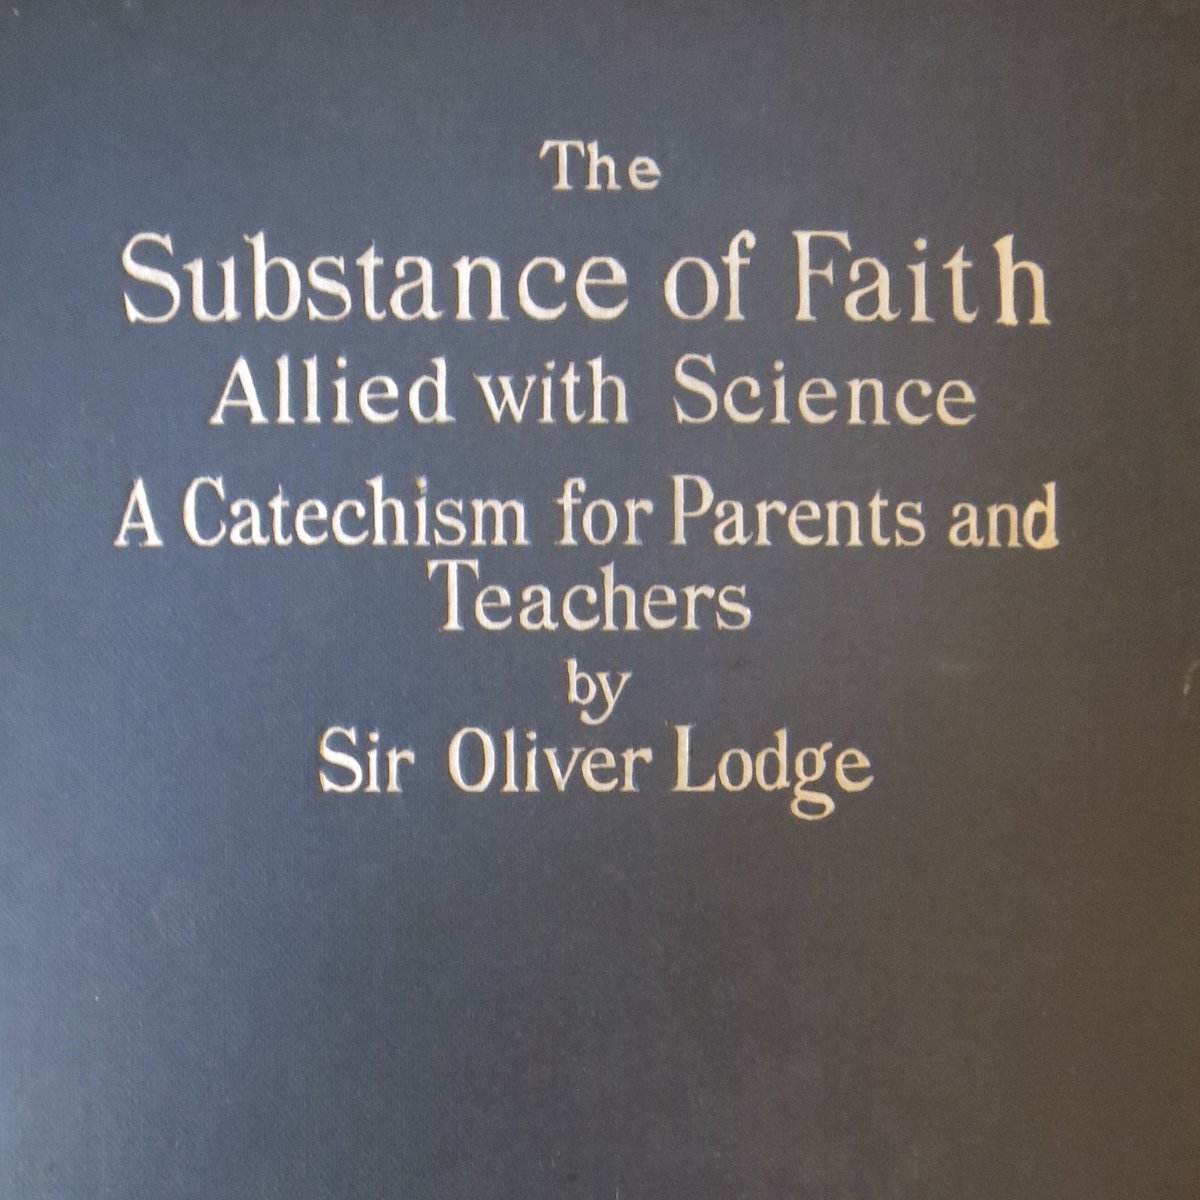 The best example of this is in Oliver Lodge’s The Substance of Faith Allied with Science: A Catechism for Parents and Teachers (1907), given to GKC by the author. The other two books with GK's marginalia are MacQuoid’s Jacobite Songs and Ballads and Allingham’s The Ballad Book.